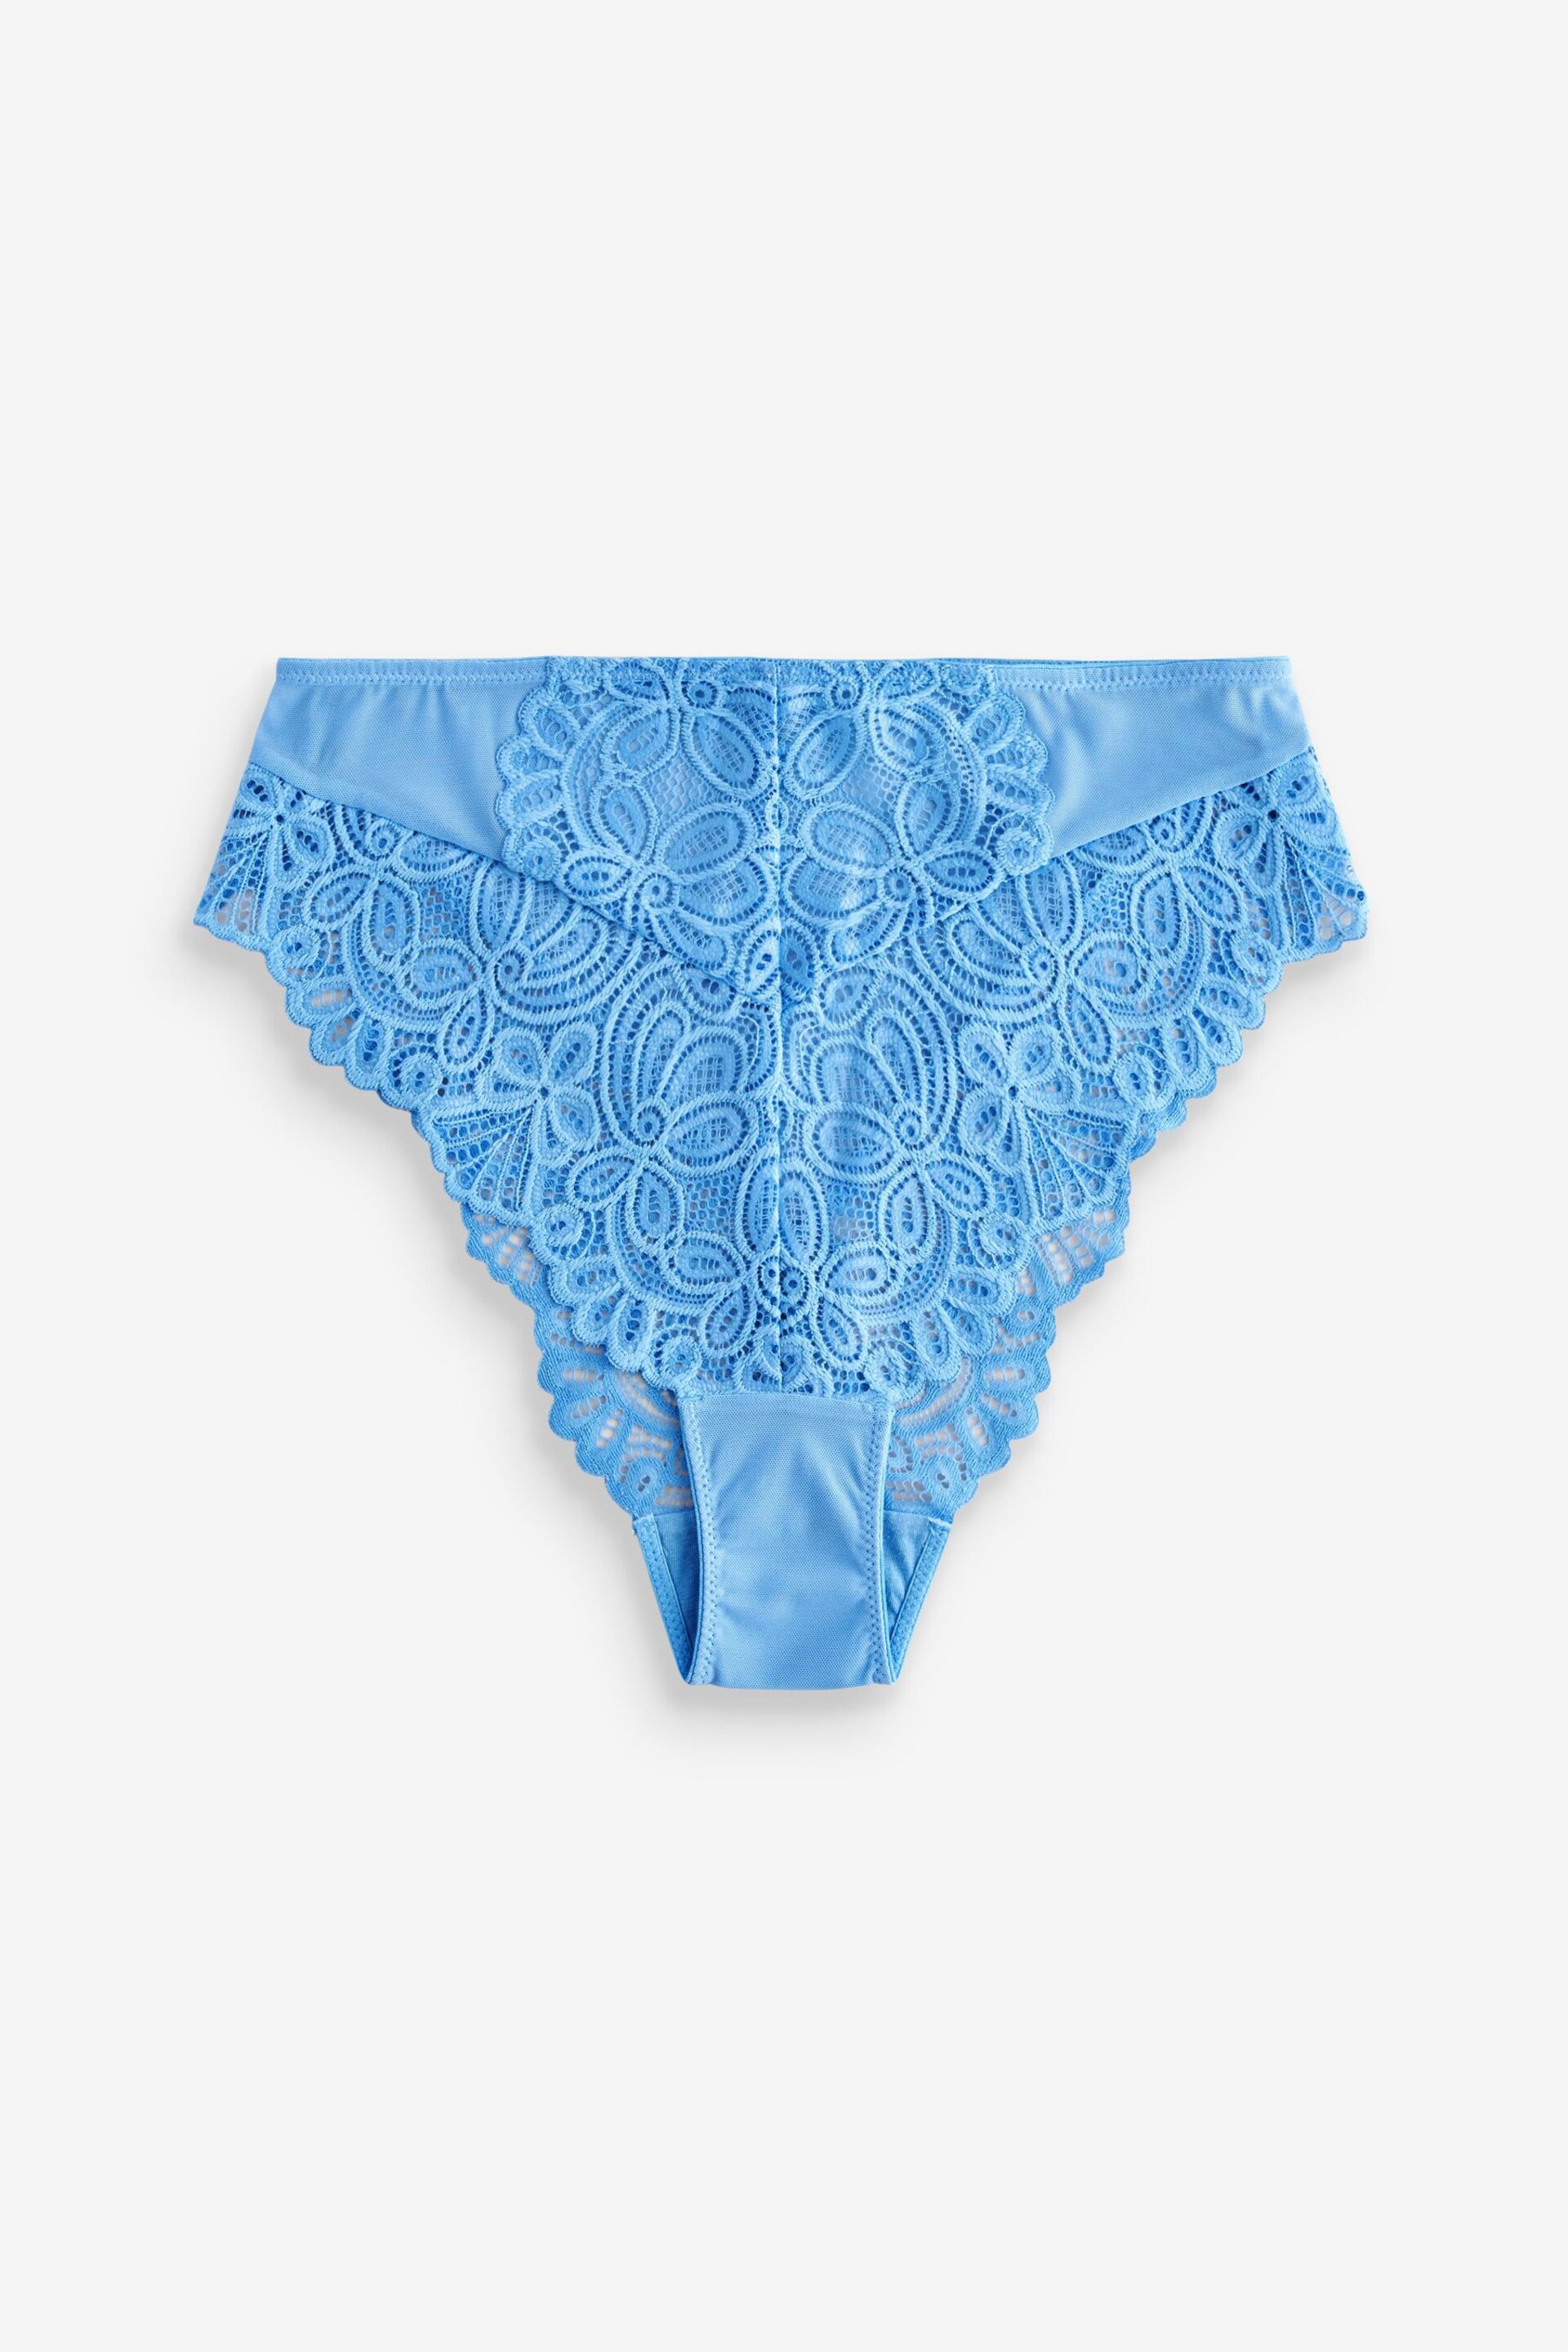 Blue Lace High Waist High Leg Knickers - Image 4 of 4